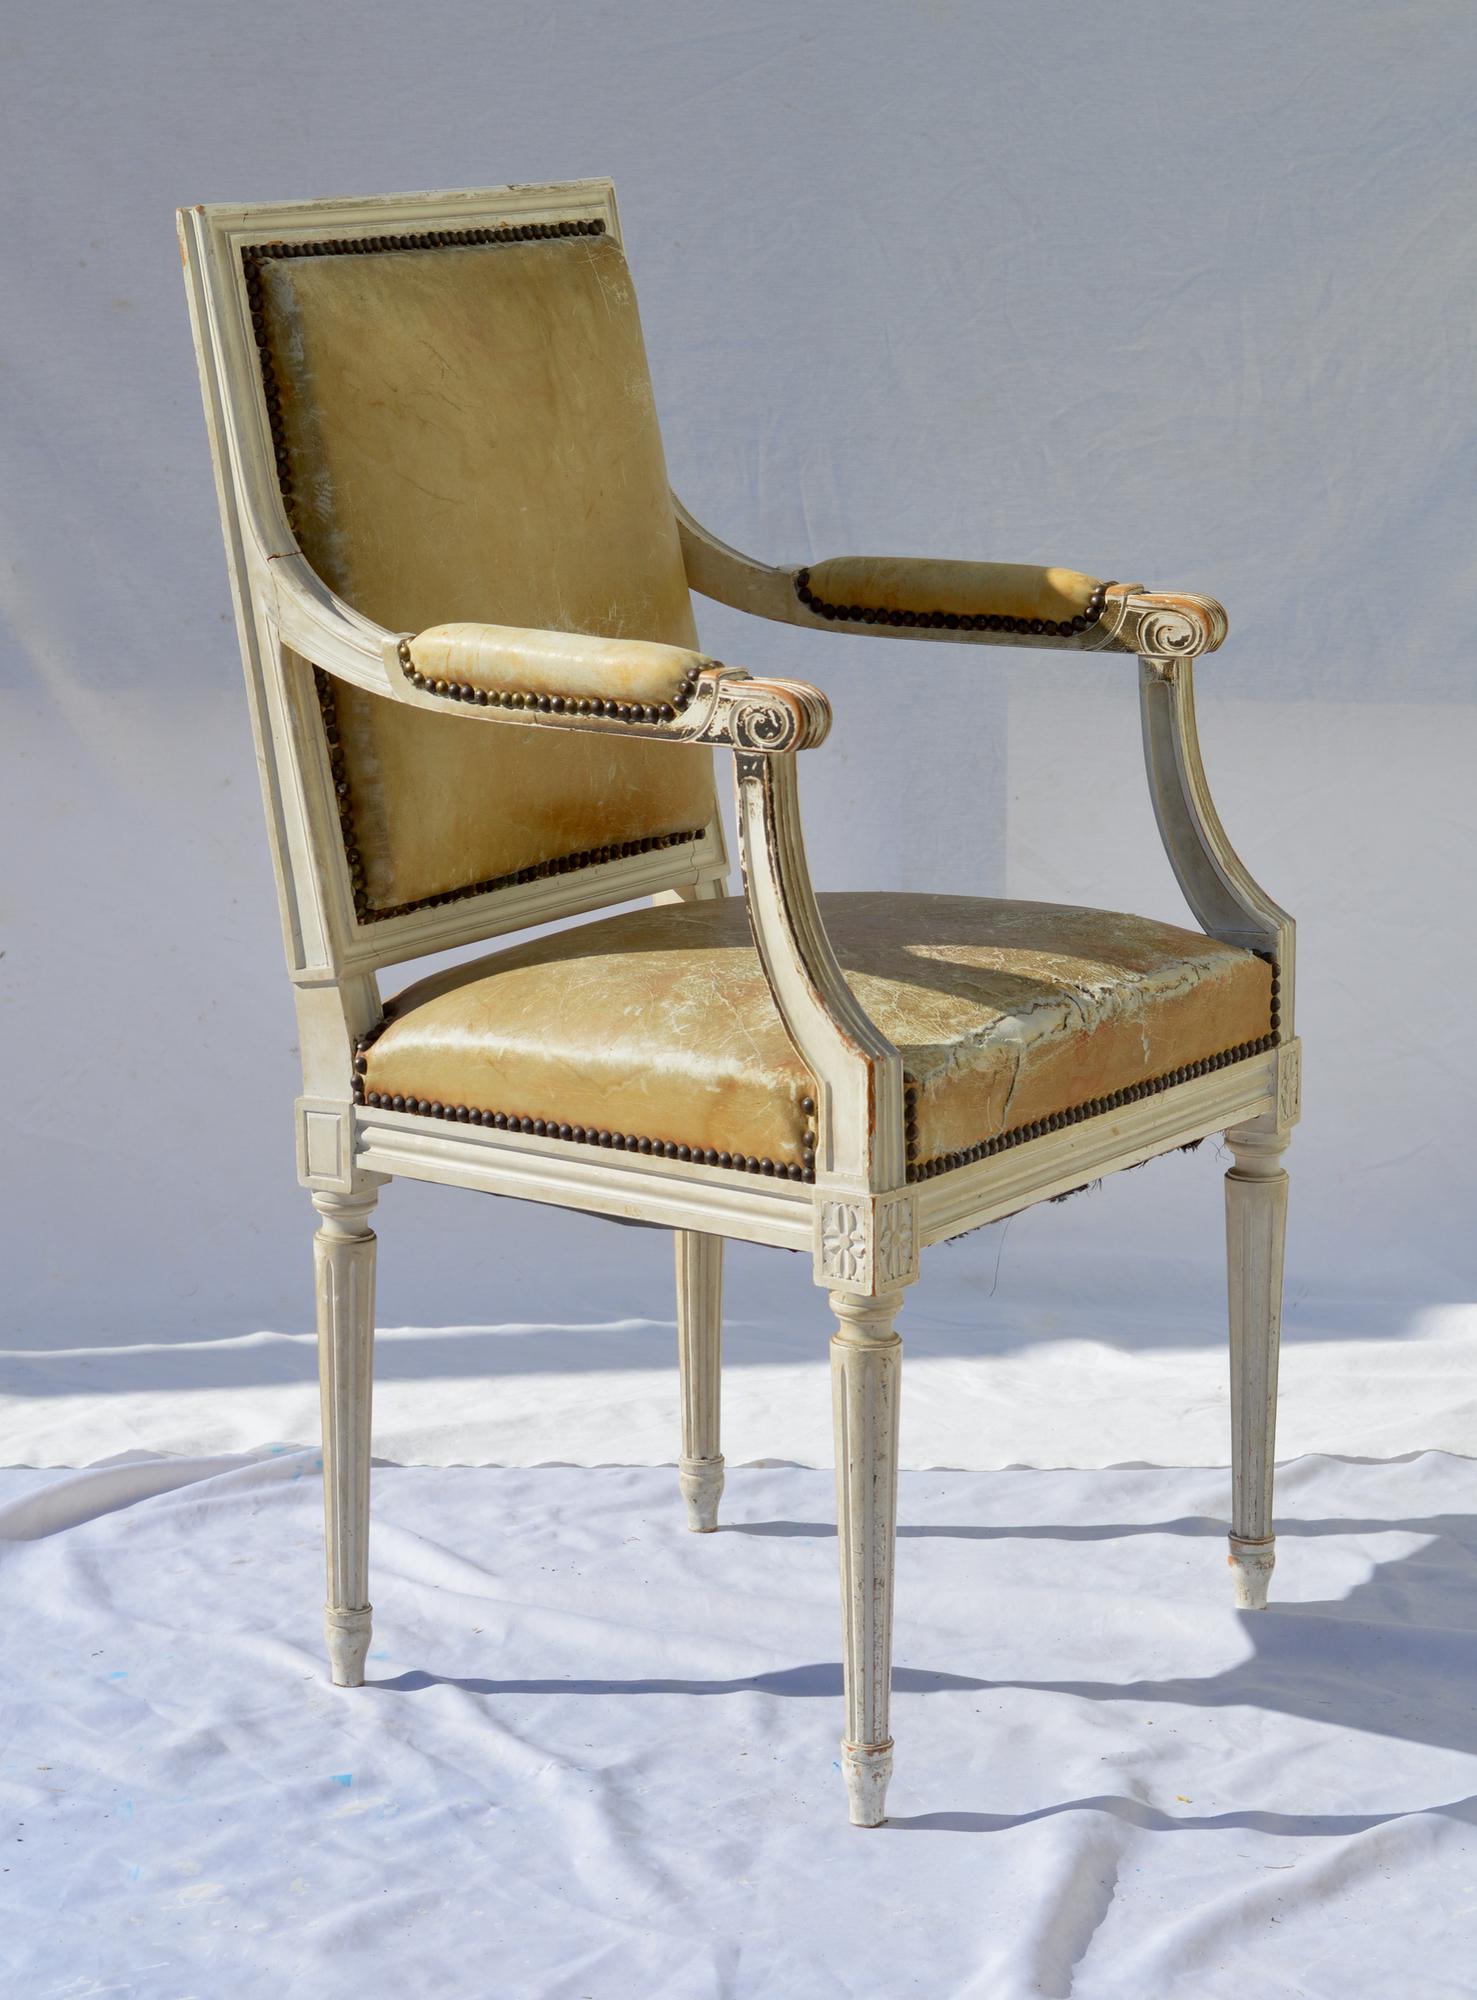 Wonderfully aged Louis XVI armchair in perfect eggshell paint and worn leather. The Classic French armchair performs well as a daily desk chair or will get lots of looks as a hall chair in a tight foyer. Very comfy and regardless of the tears in